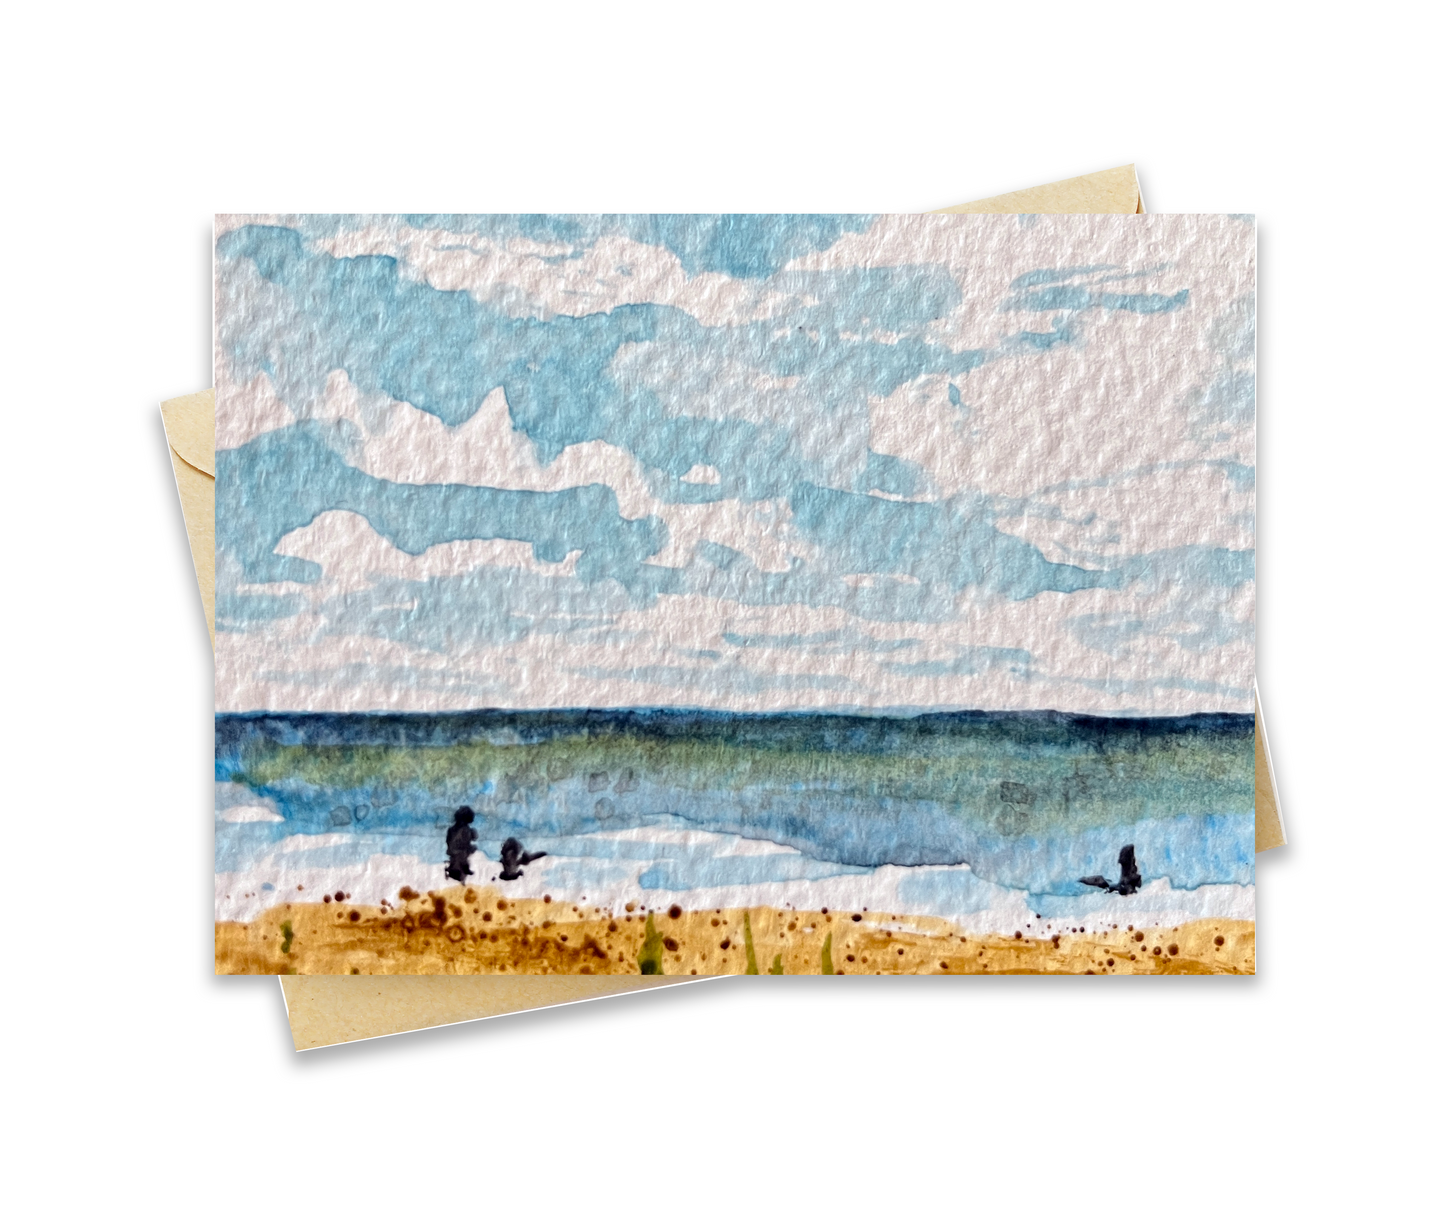 BellavanceInk: Greeting Card With Watercolor Of A Day At The Beach 5 x 7 Inches